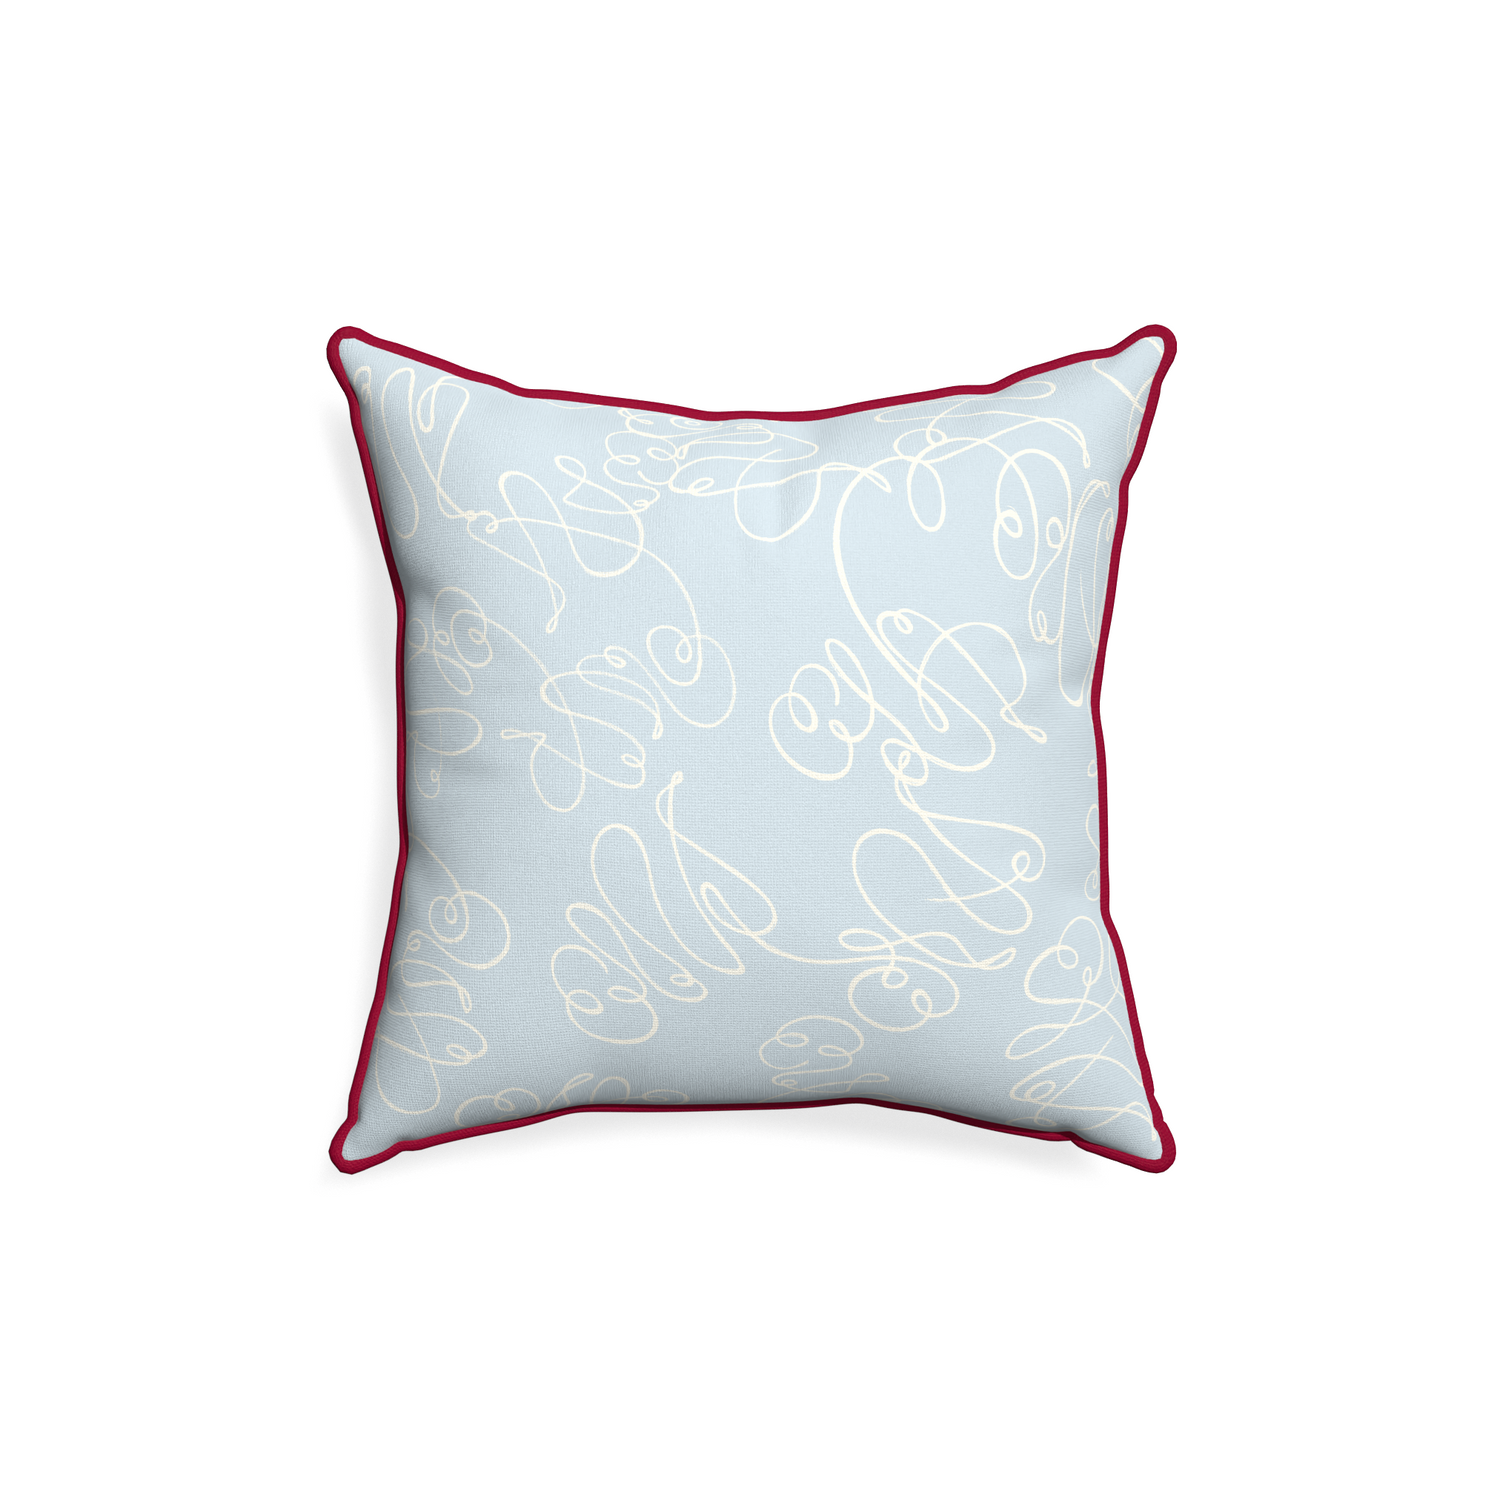 18-square mirabella custom pillow with raspberry piping on white background